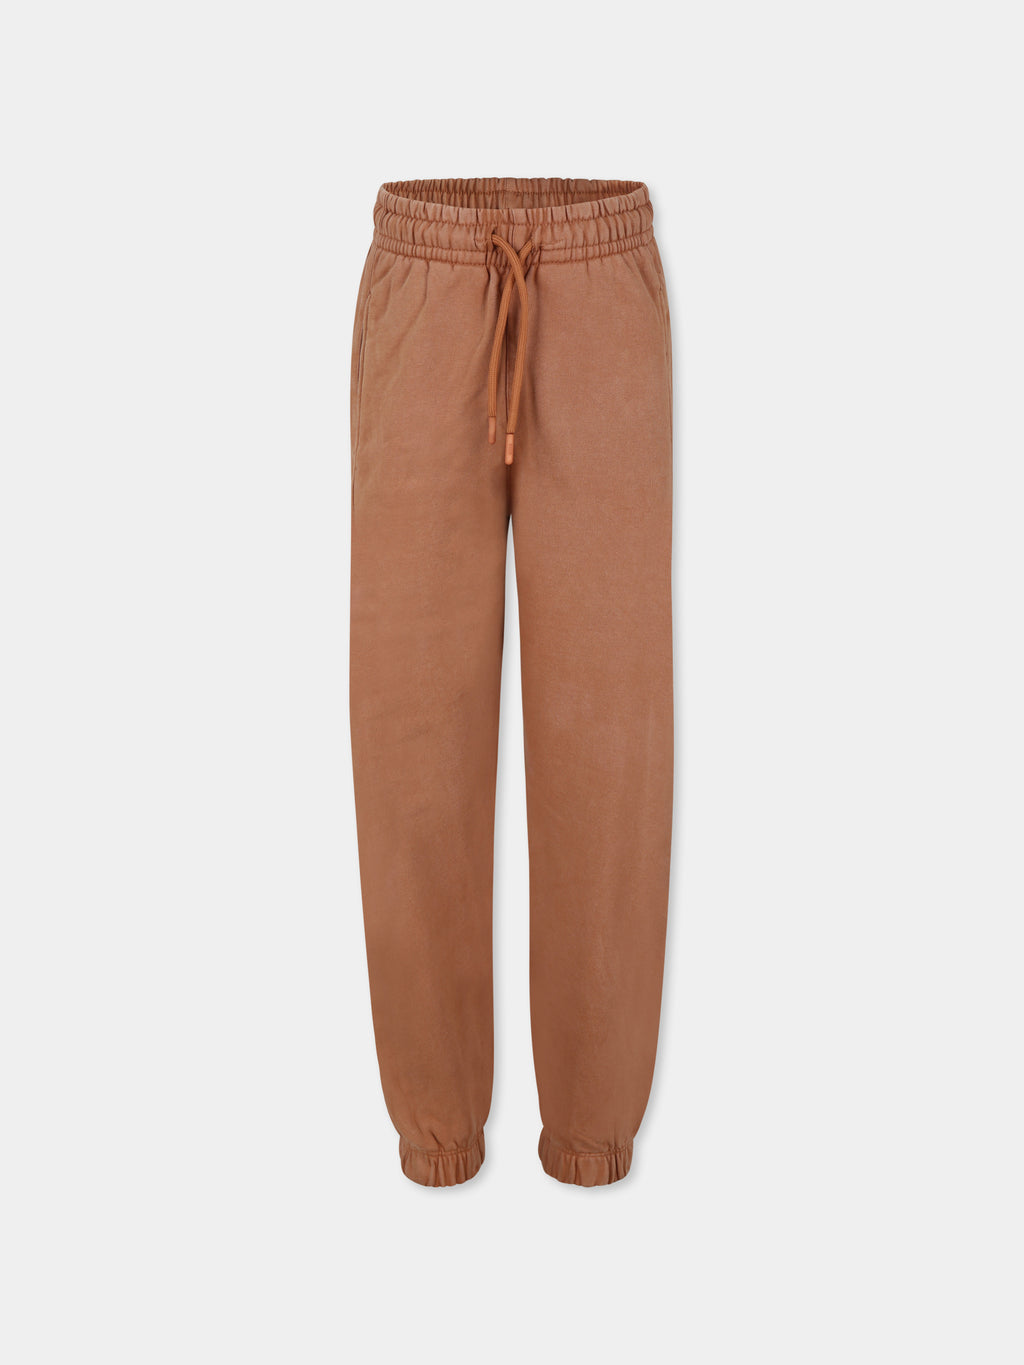 Beige trousers for kids with logo